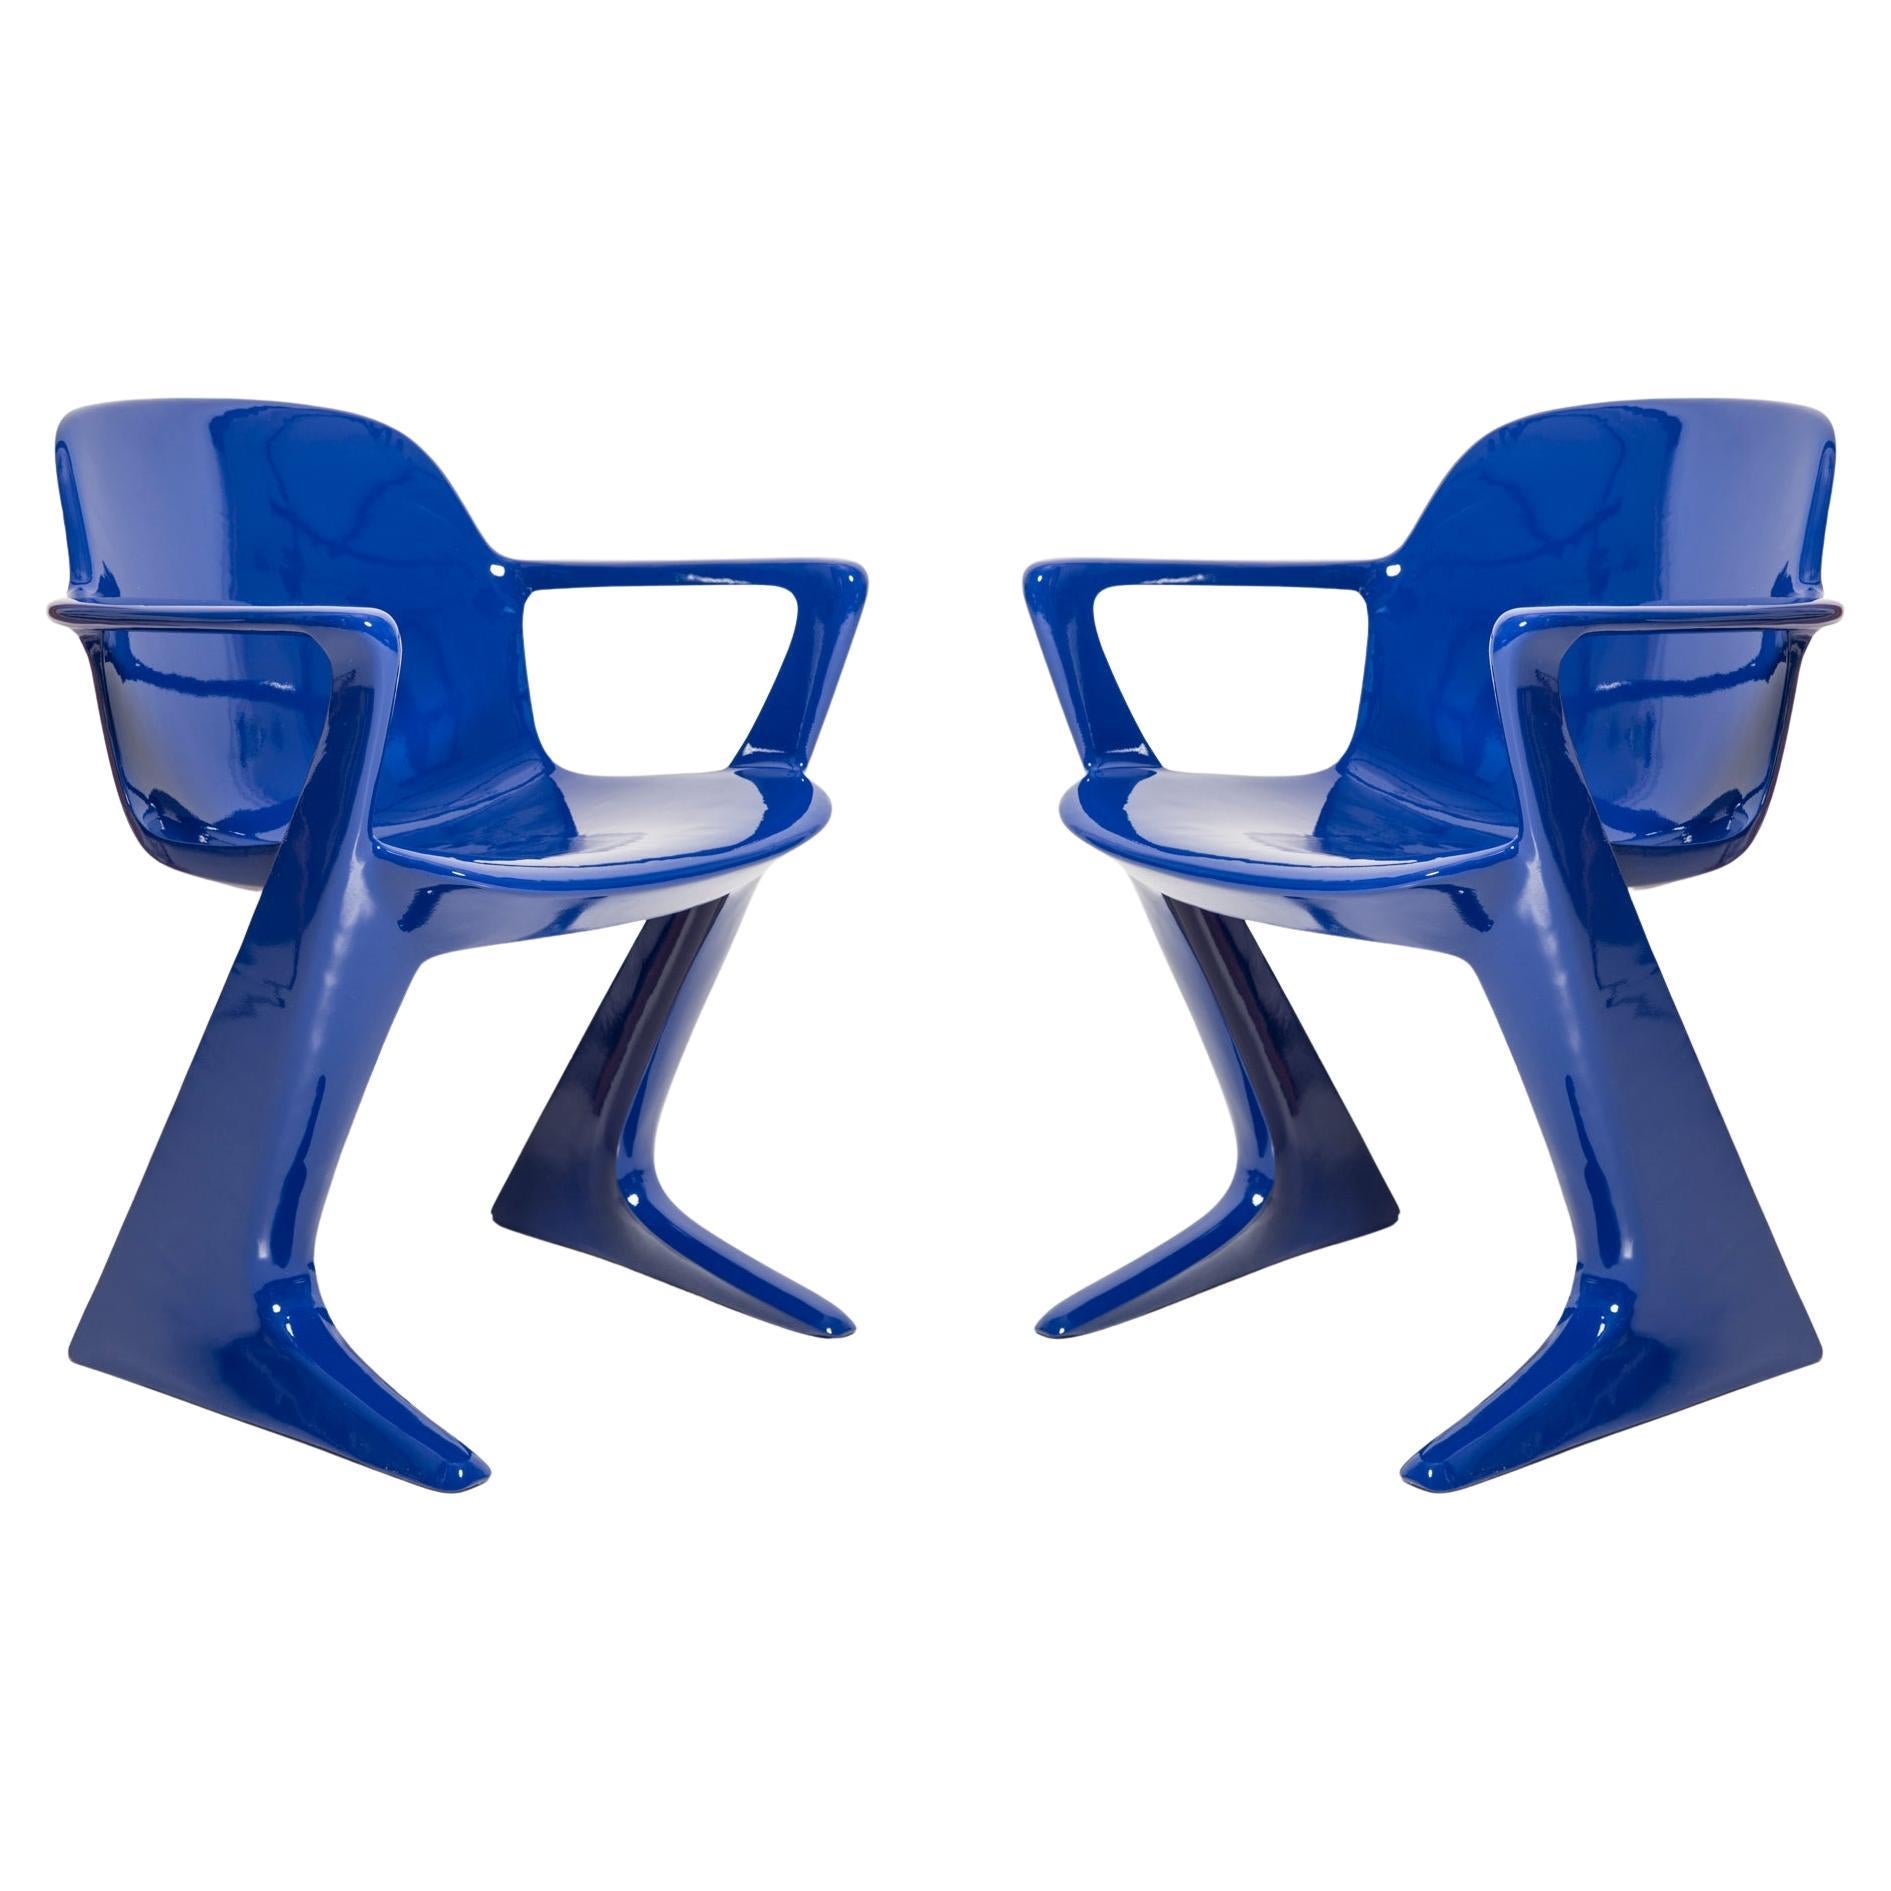 Pair of Ultramarine Blue Kangaroo Chairs Designed by Ernst Moeckl, Germany, 1968 For Sale